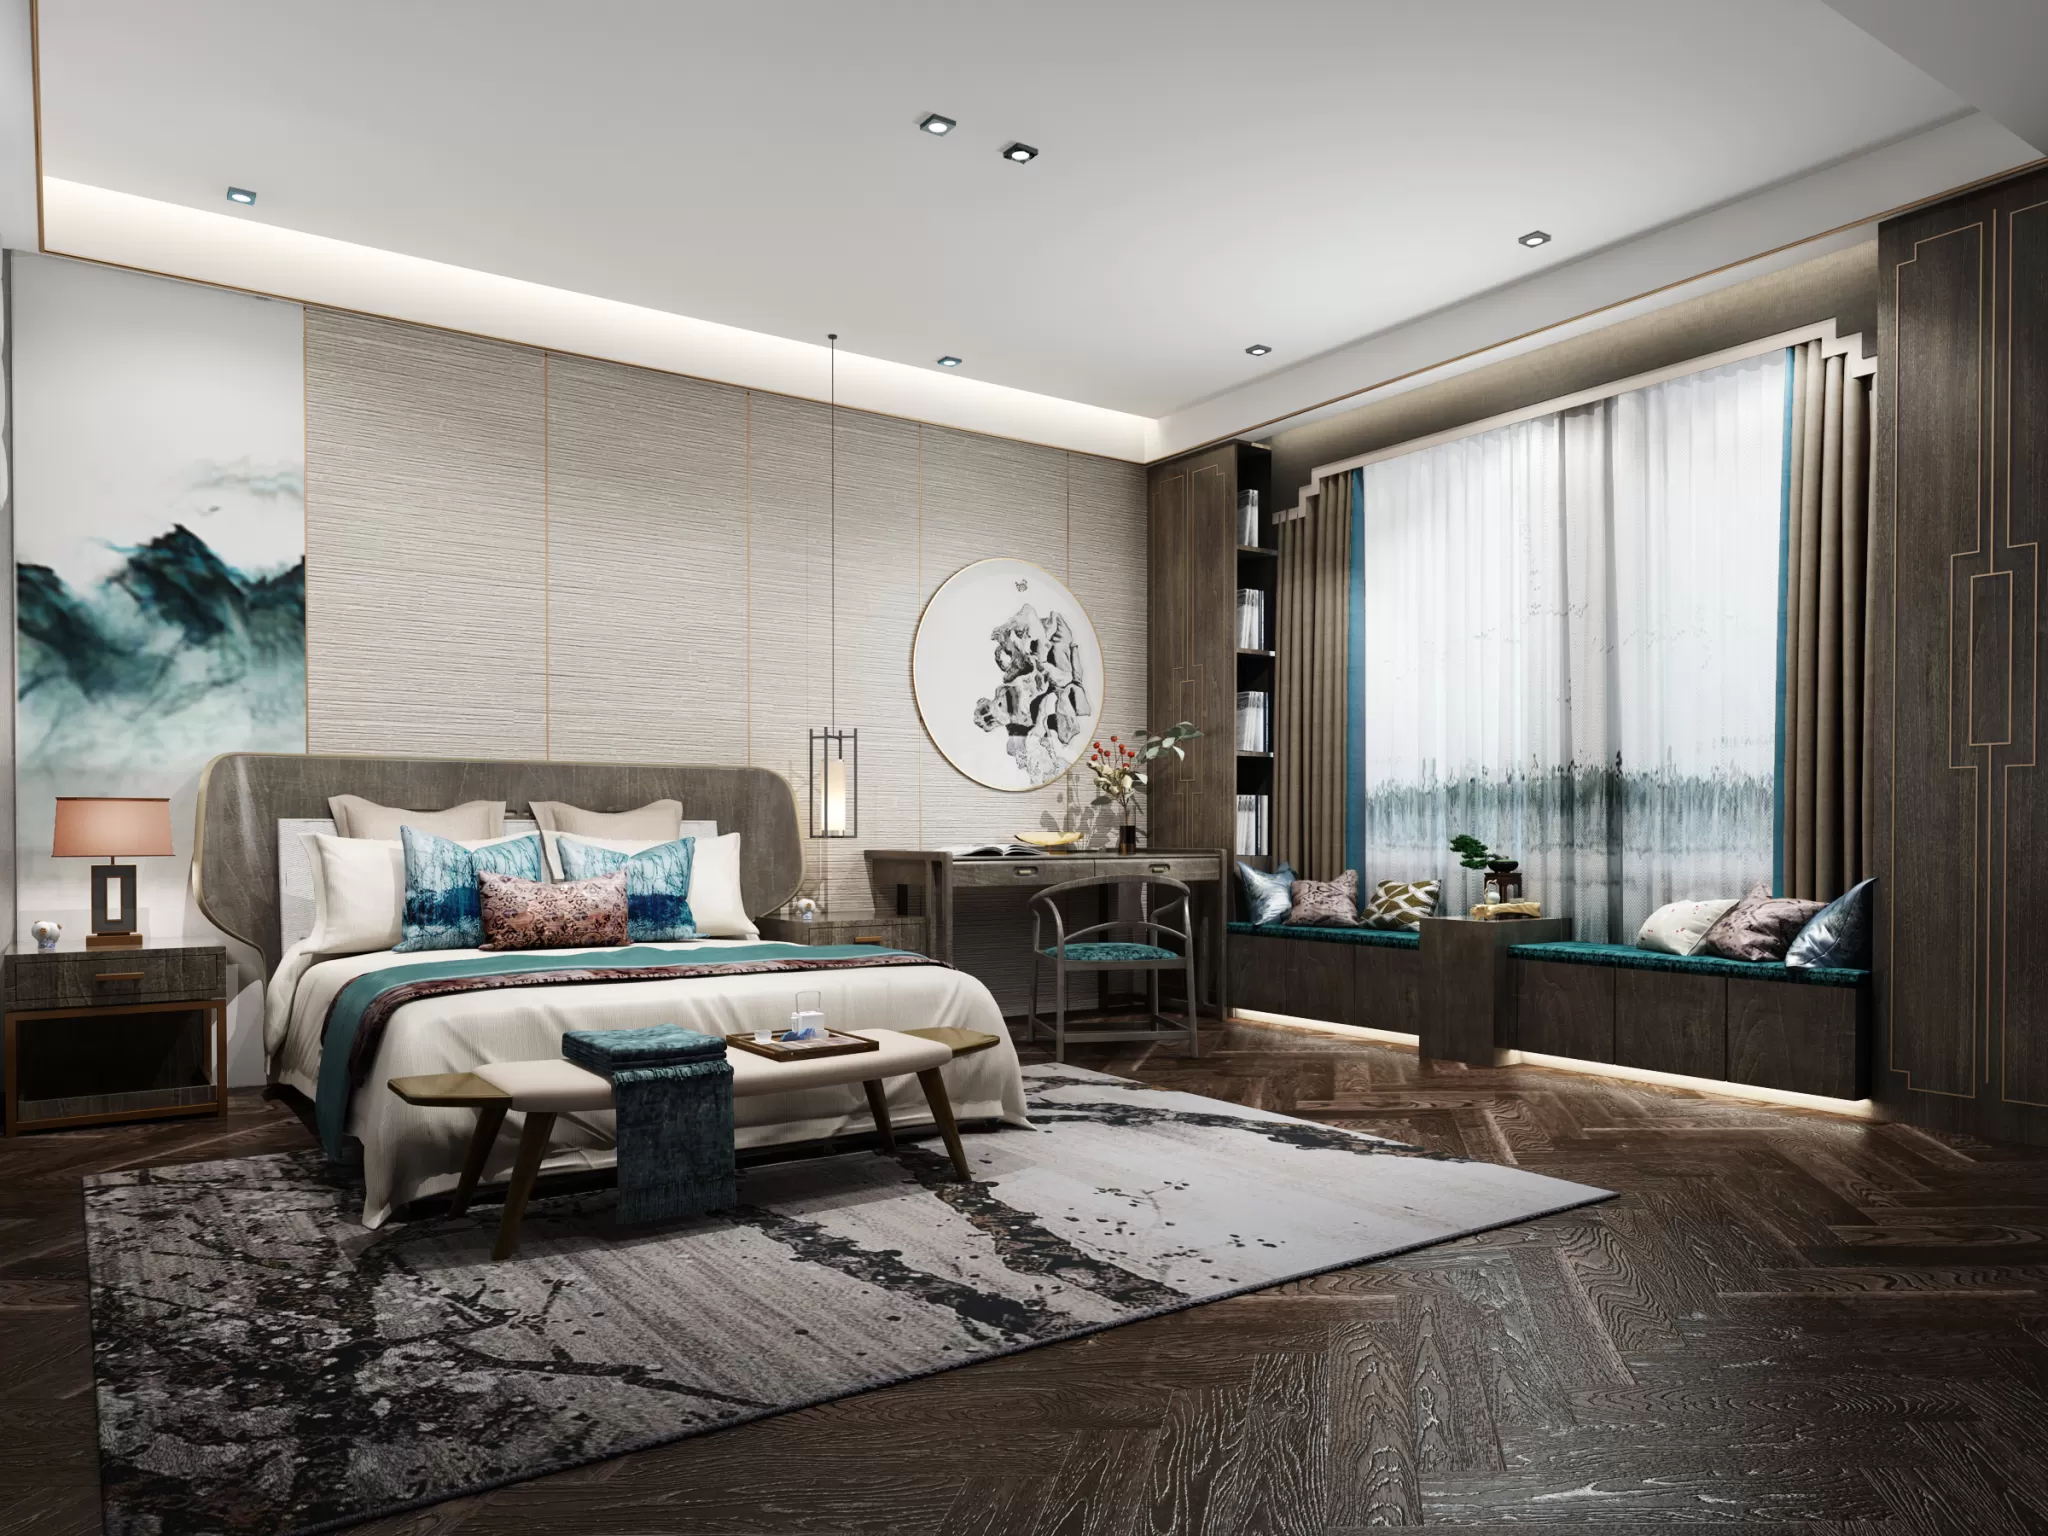 DESMOD INTERIOR 2021 (VRAY)/5. BEDROOM – 2. CHINESE STYLES – 057